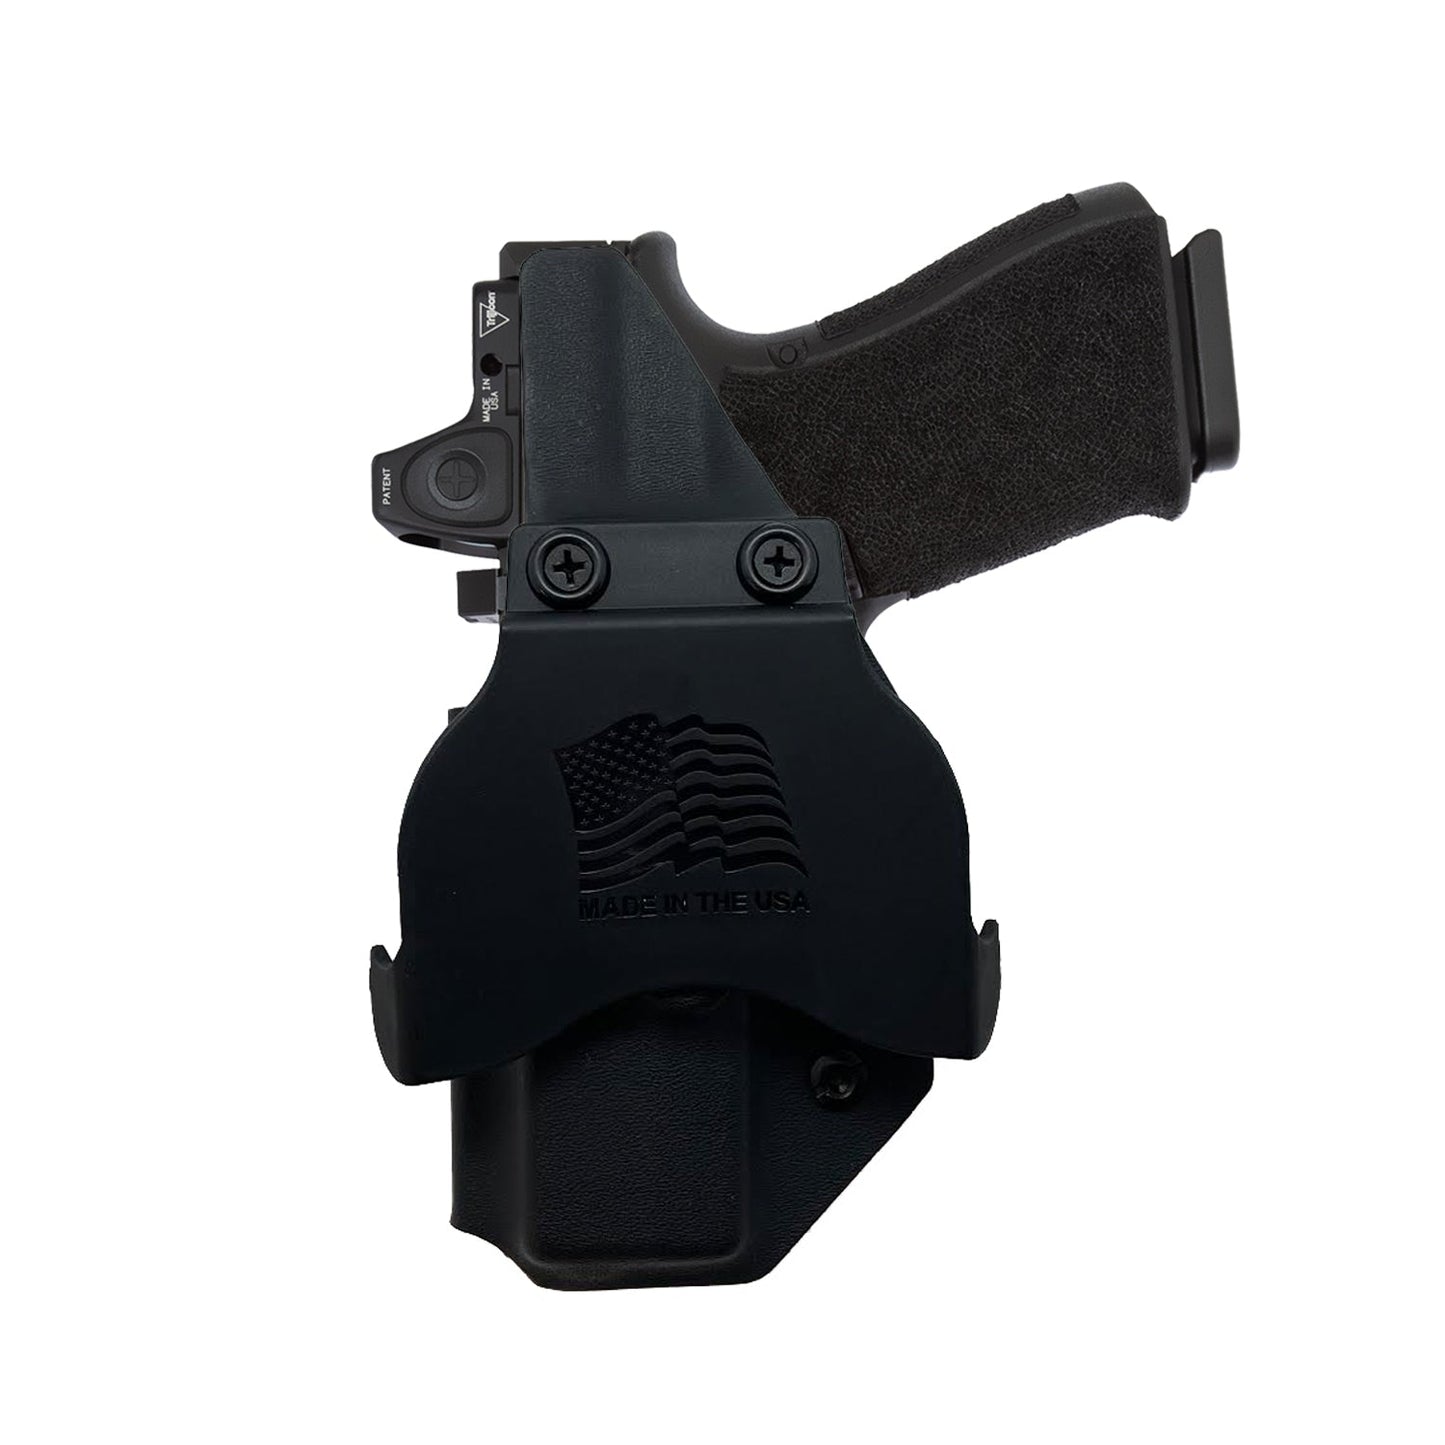 SIG P365/ P365X With LIMA Light/ Laser OWB (Outside The Waistband Holster)